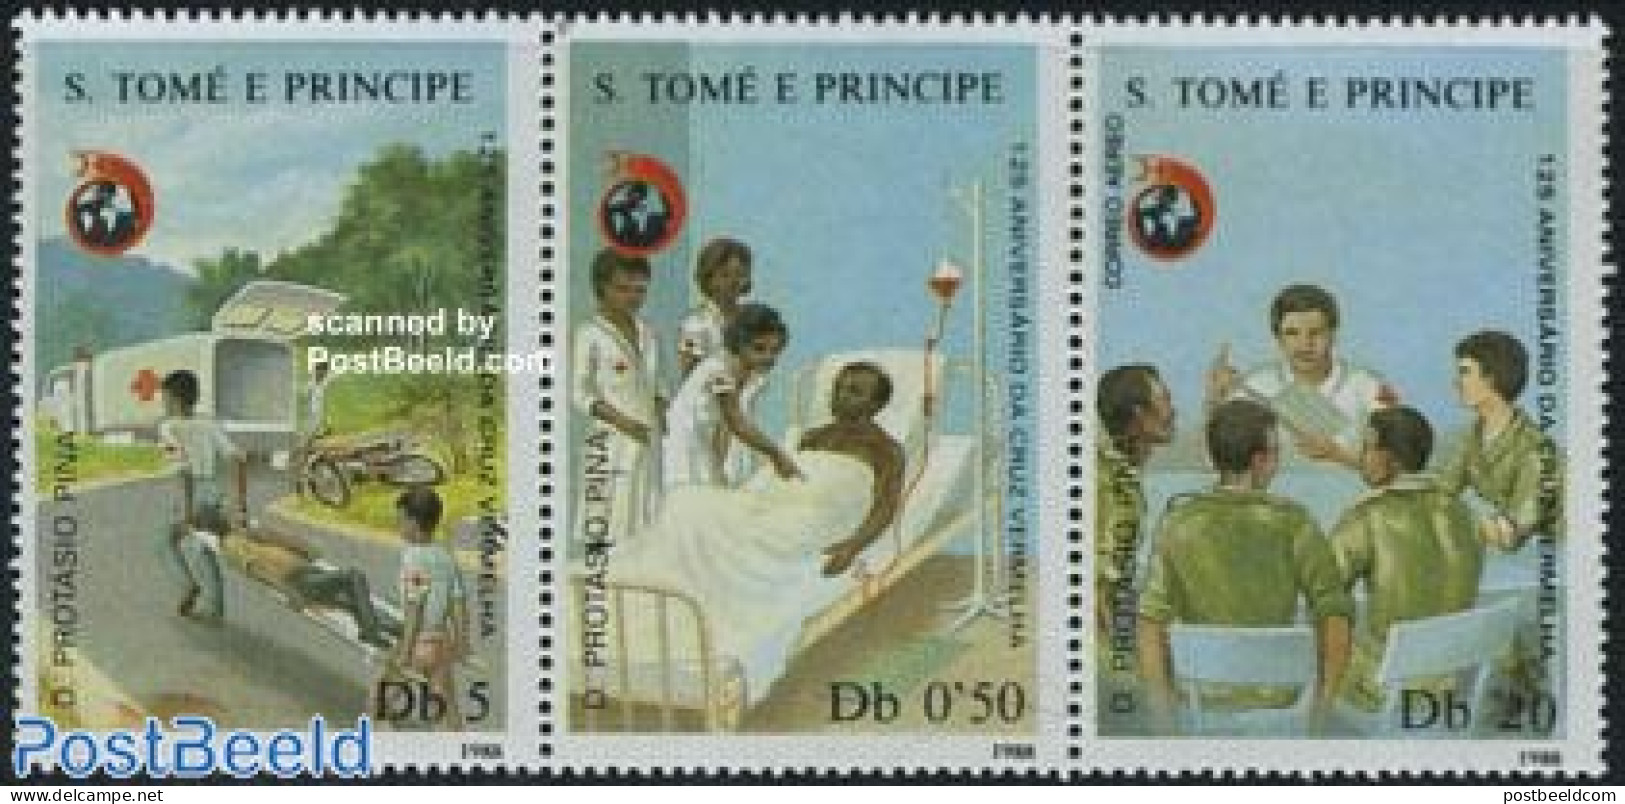 Sao Tome/Principe 1988 Red Cross 3v [::], Mint NH, Health - Transport - Red Cross - Motorcycles - Croix-Rouge